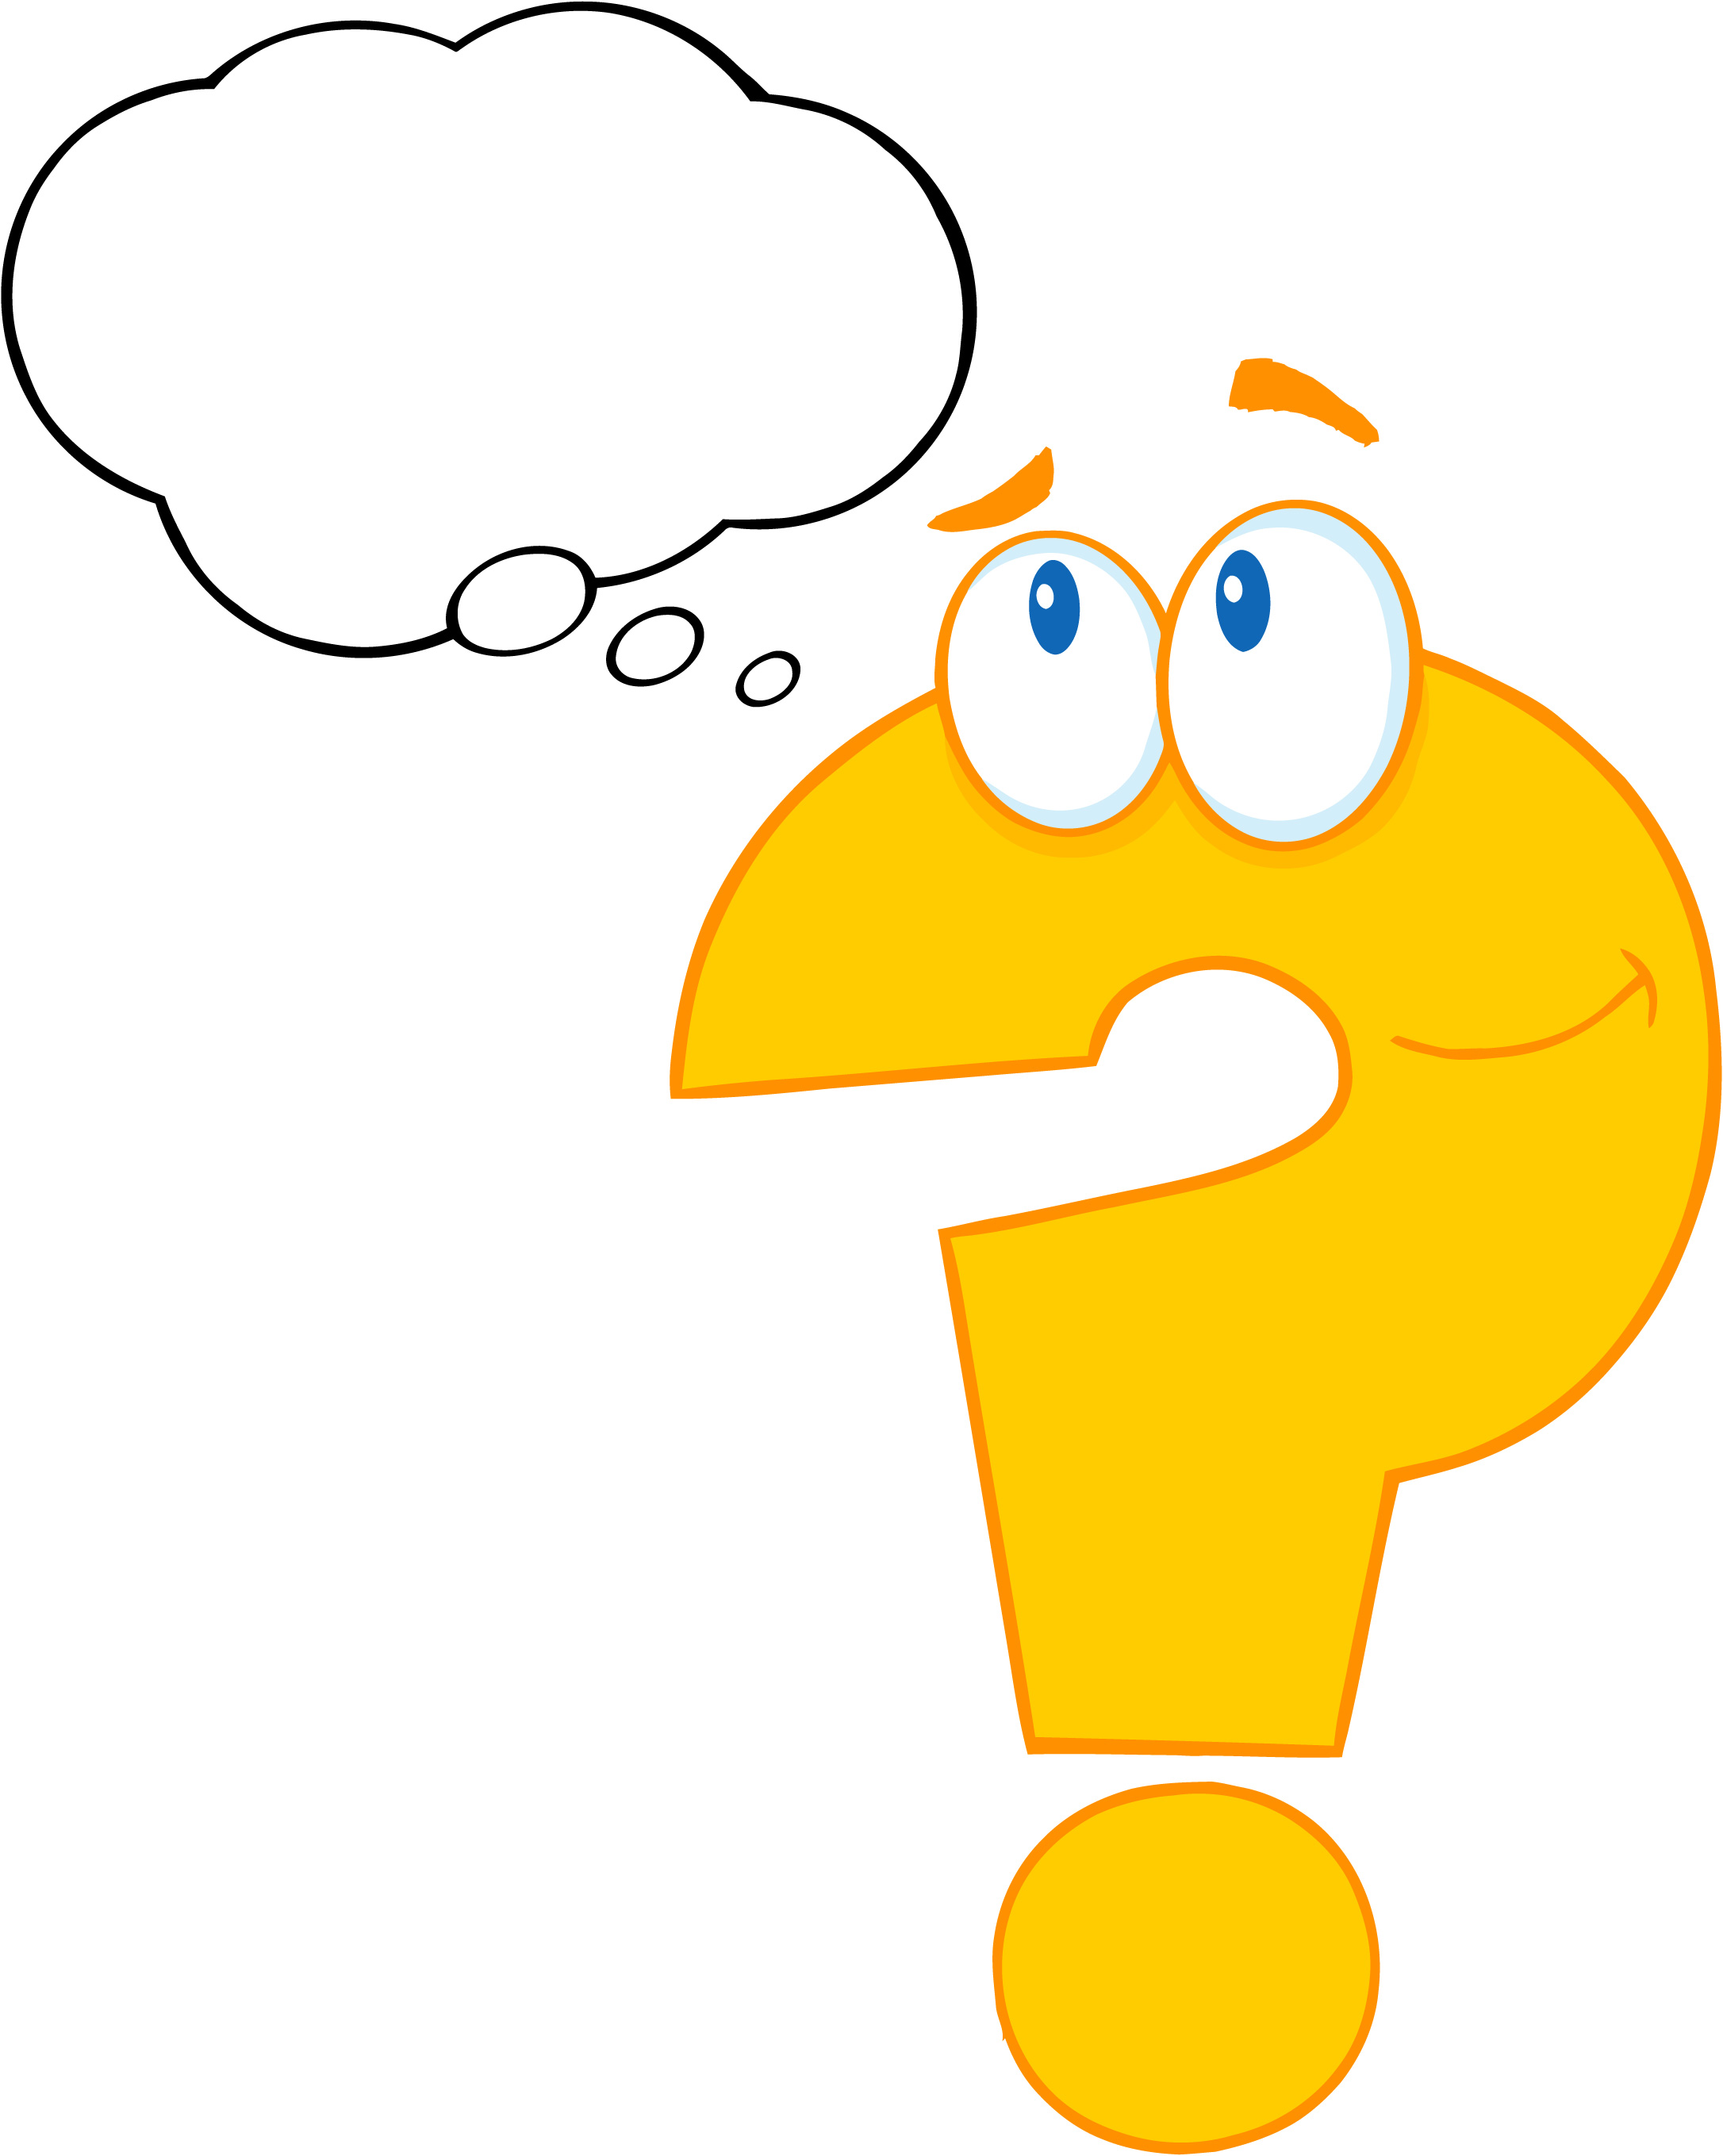 Question mark clip art free clipart images image 2